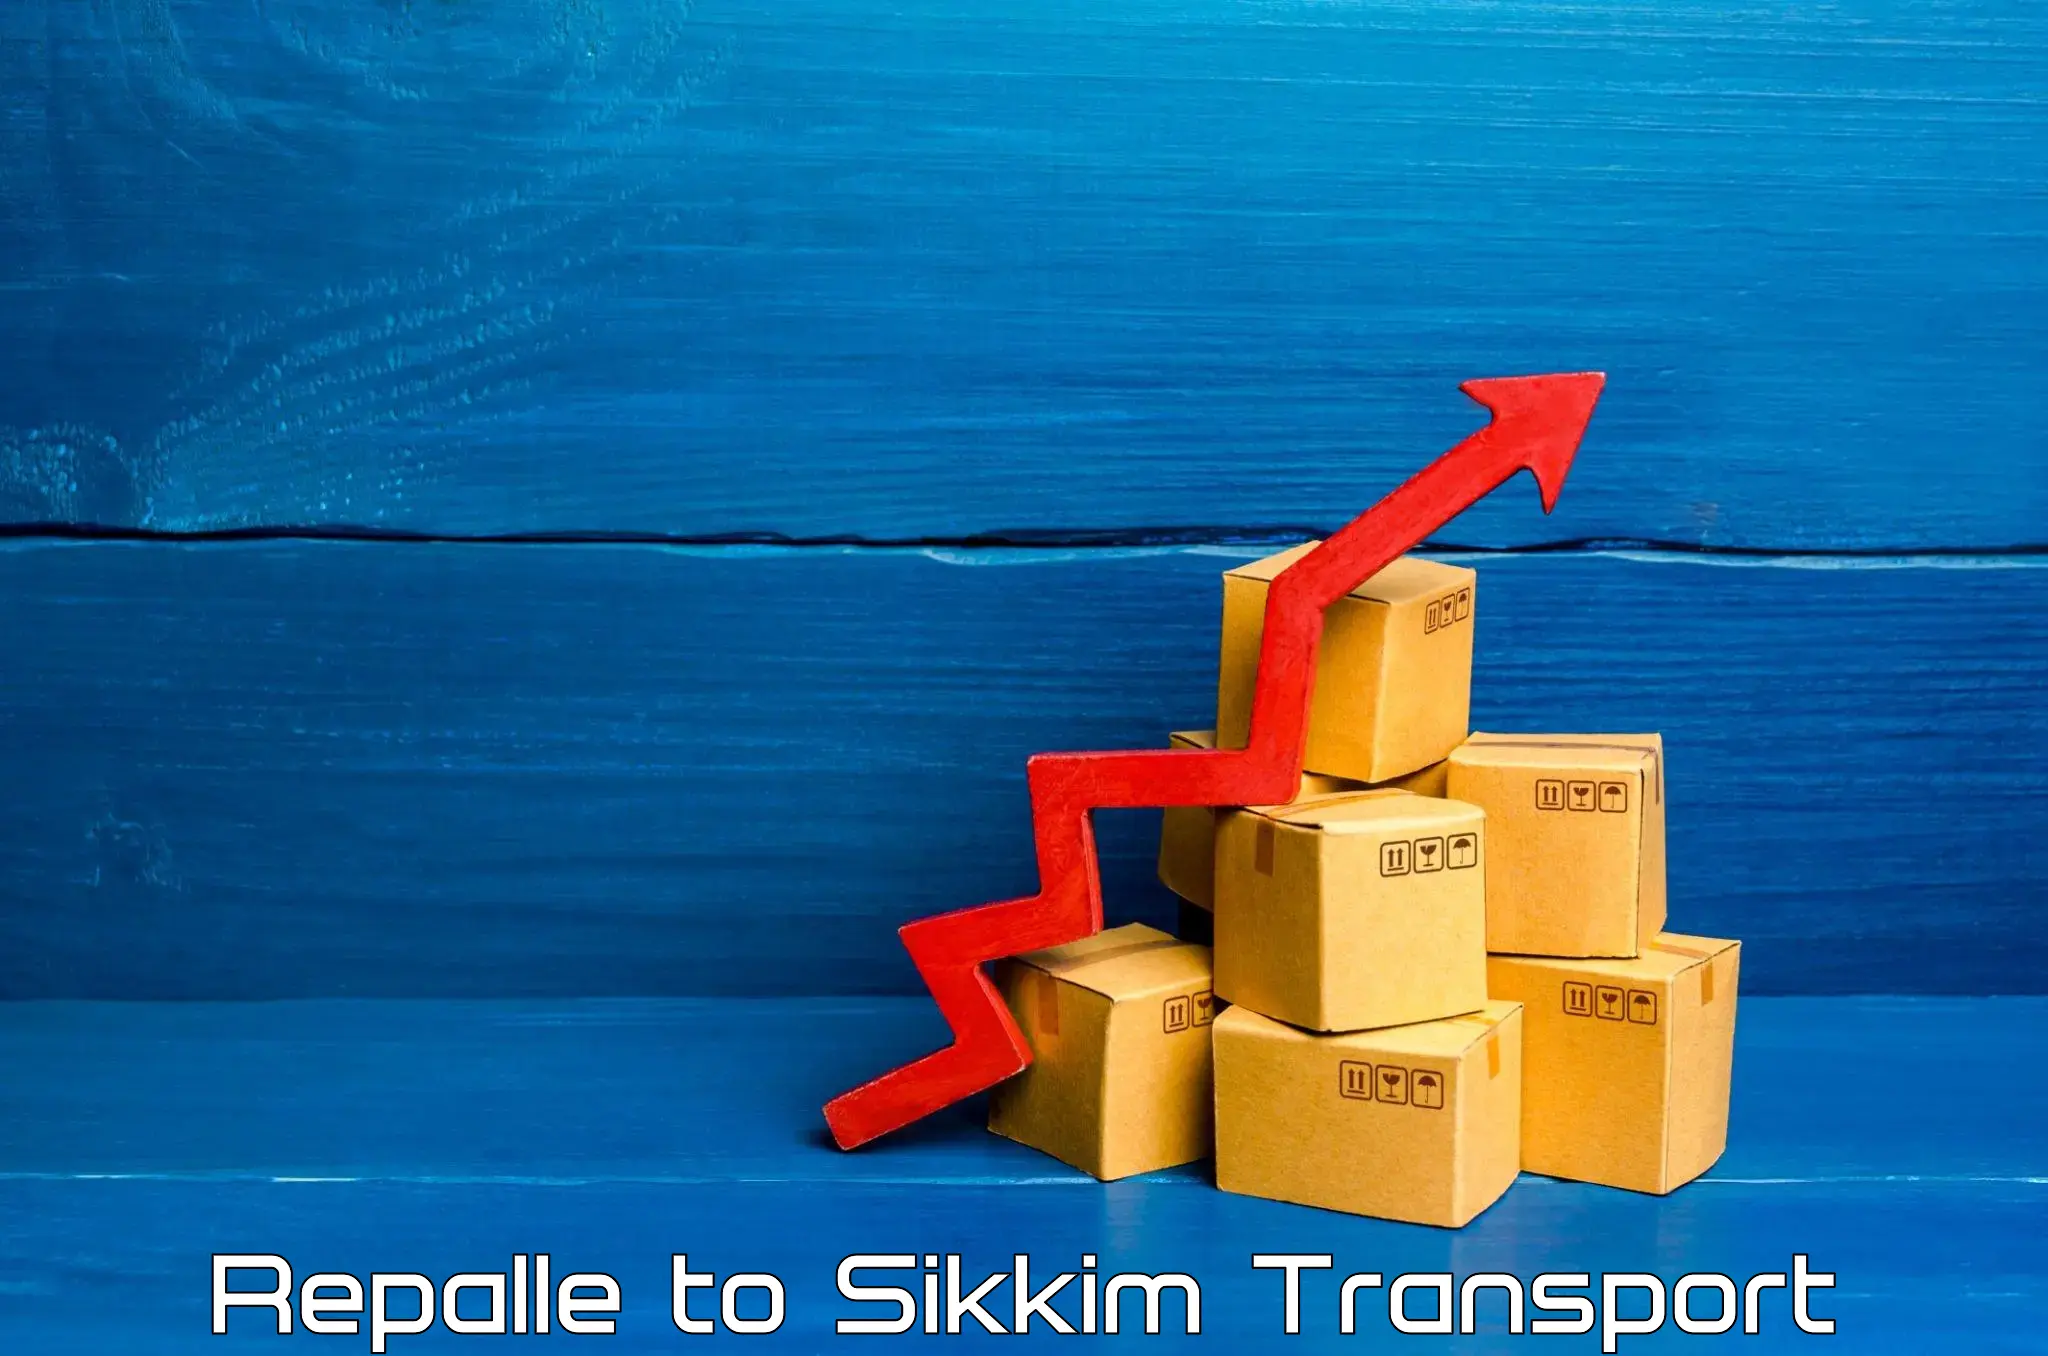 Pick up transport service Repalle to North Sikkim